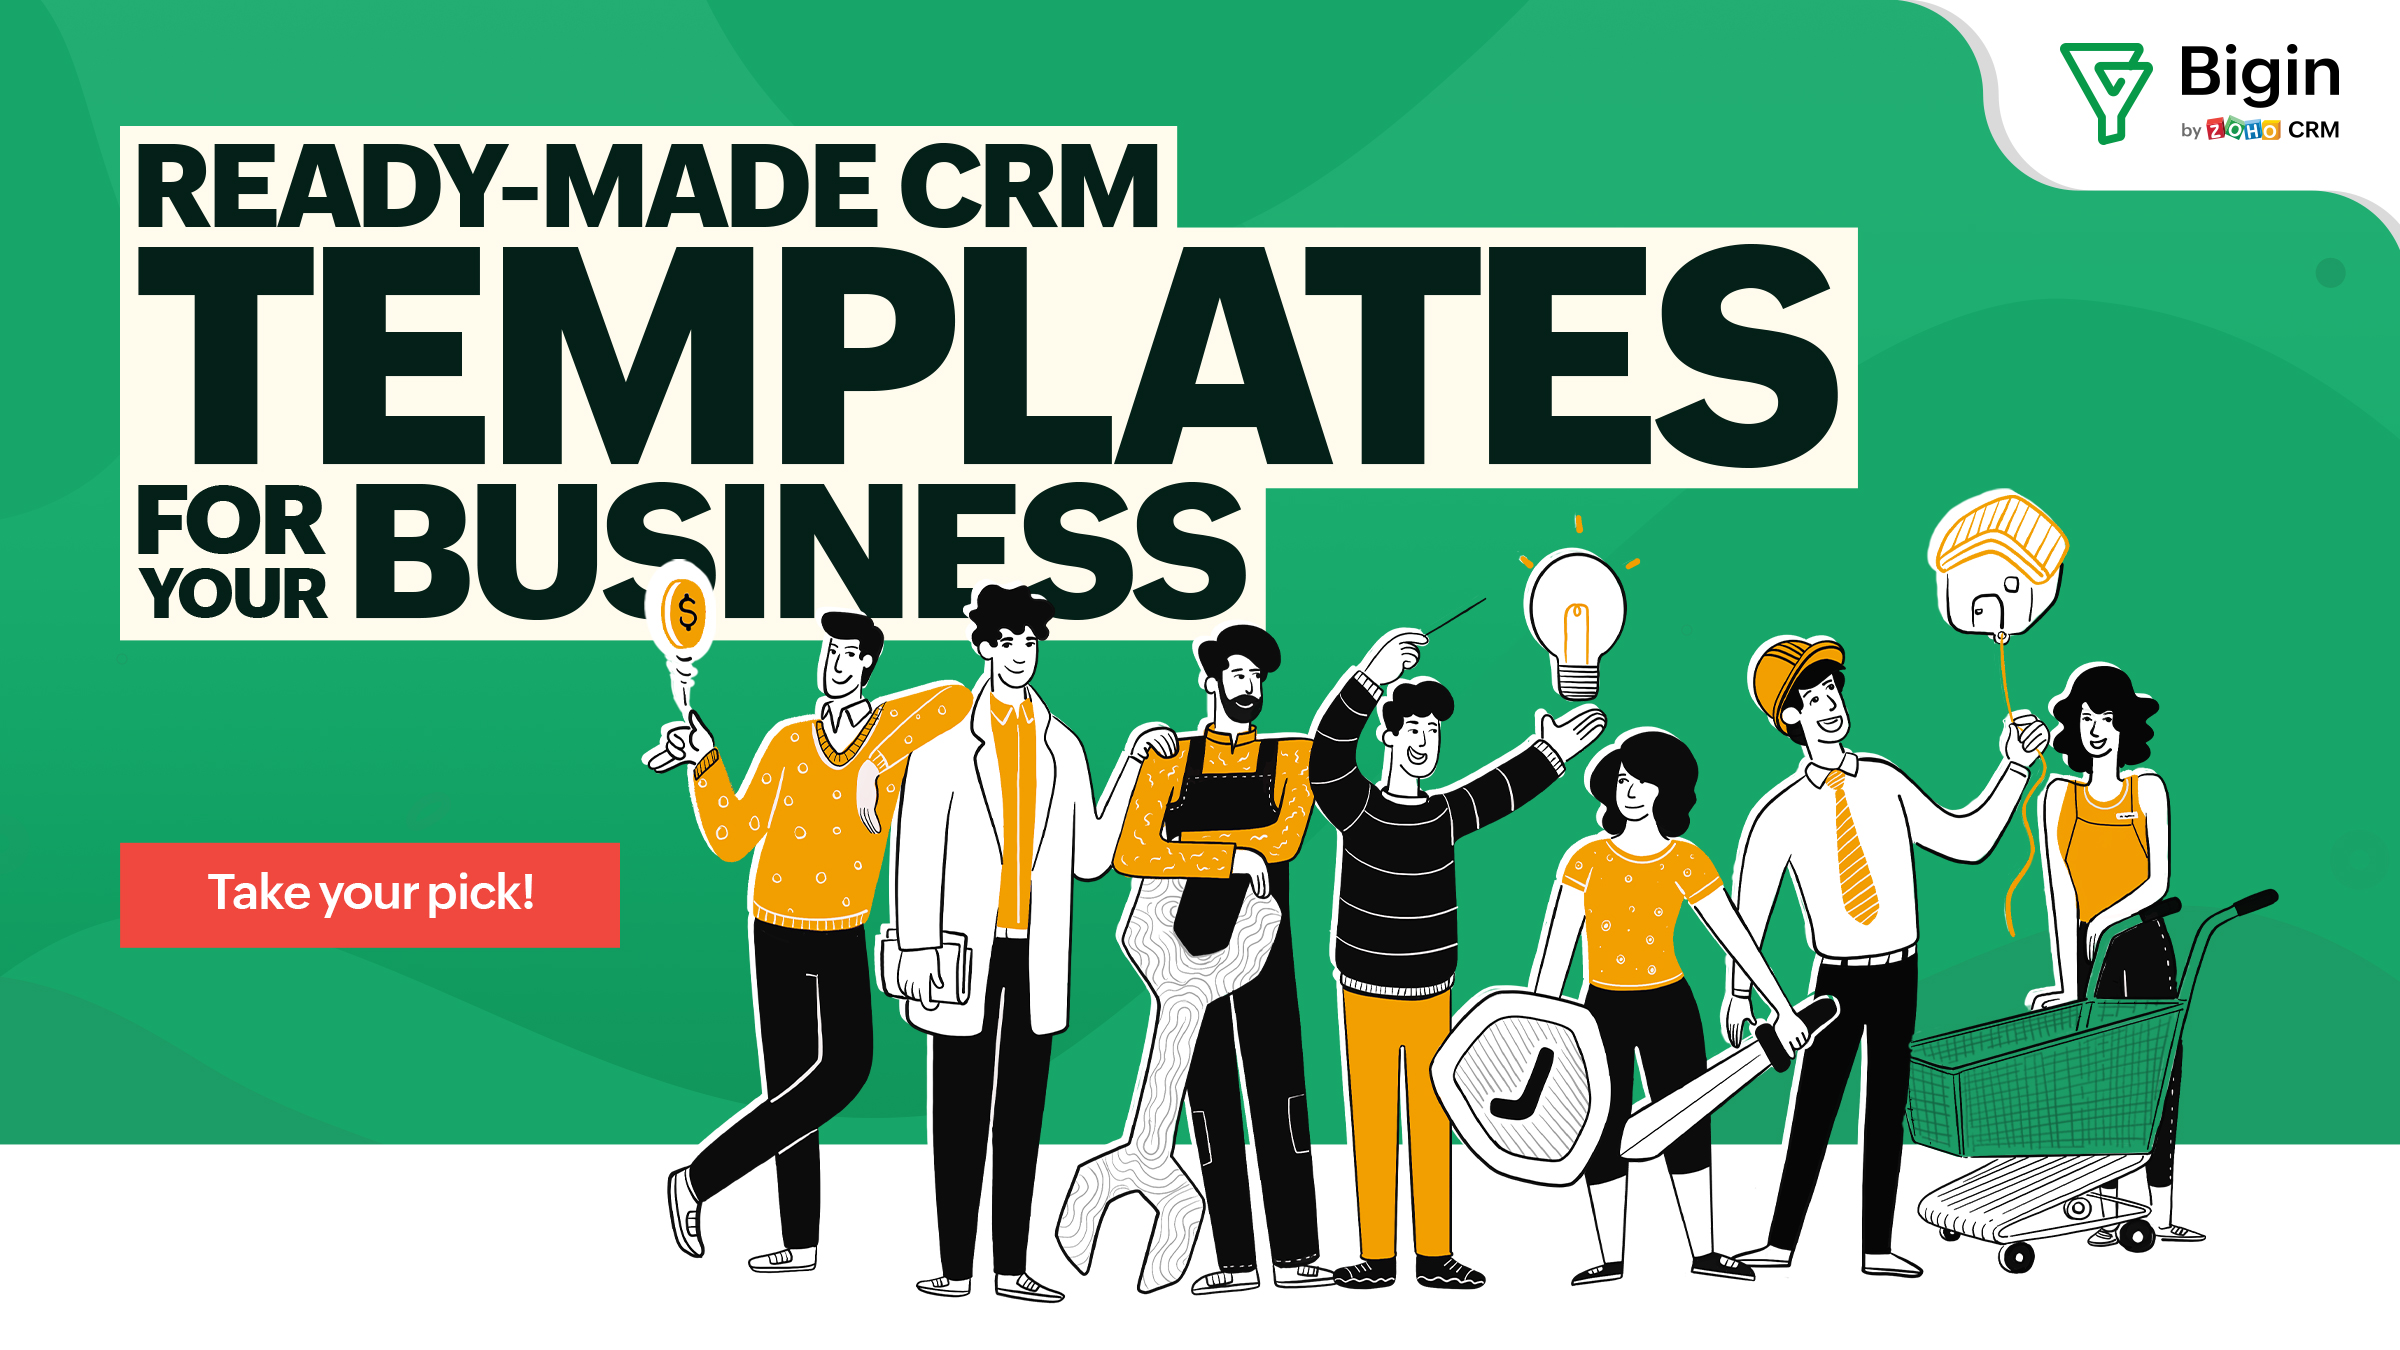 Pick a ready-made CRM template for your business with Bigin. Forget long, complex CRM setups!